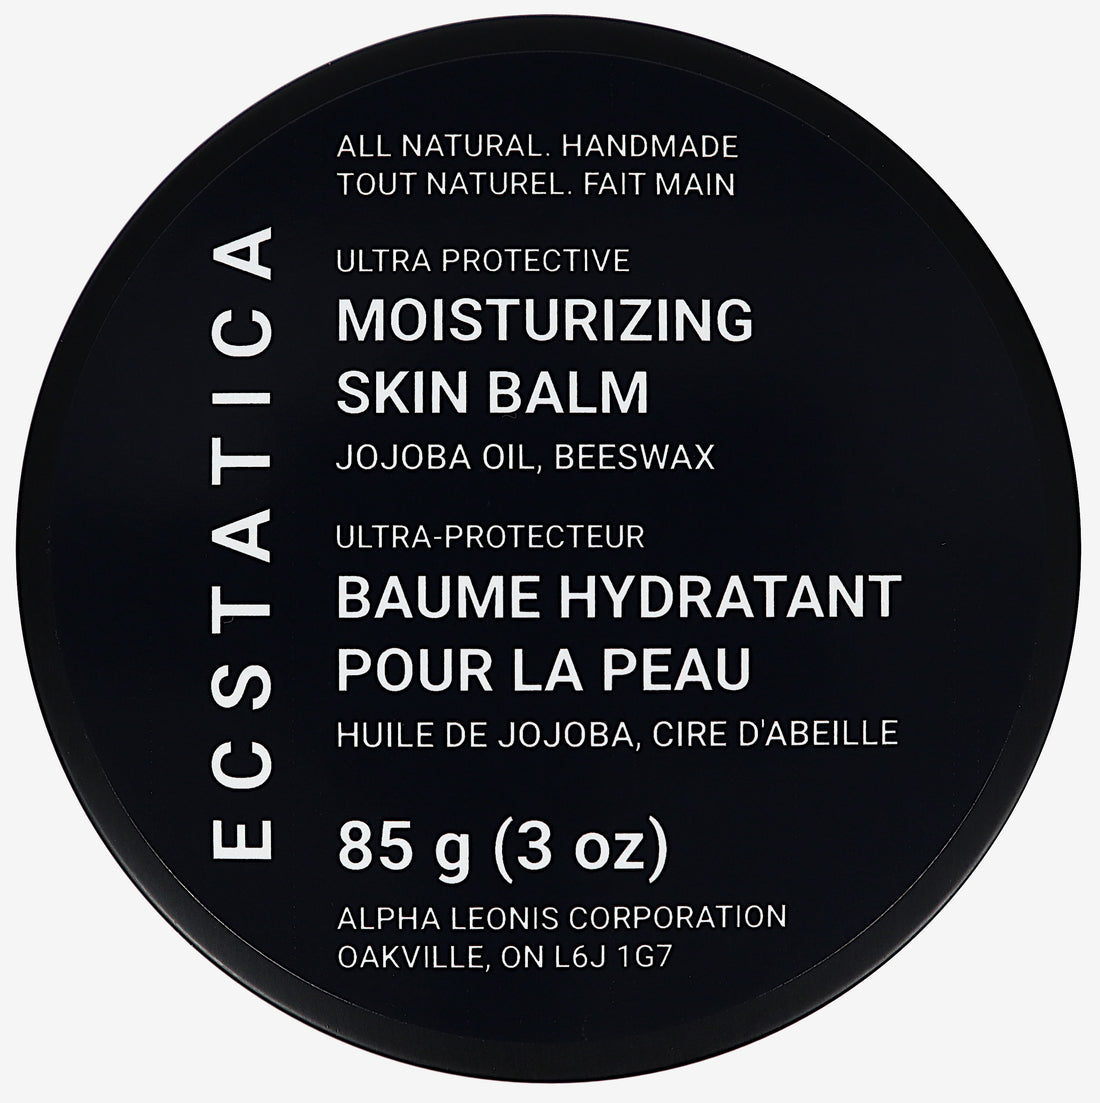 Ecstatica Canadian All-Natural Handmade Local Ultra Protection Moisturizing Skin Balm Cocoa Butter, Coconut Oil, Grapeseed Oil, Jojoba Oil, Shea Butter, Beeswax 85 g (3 oz) Top Lid